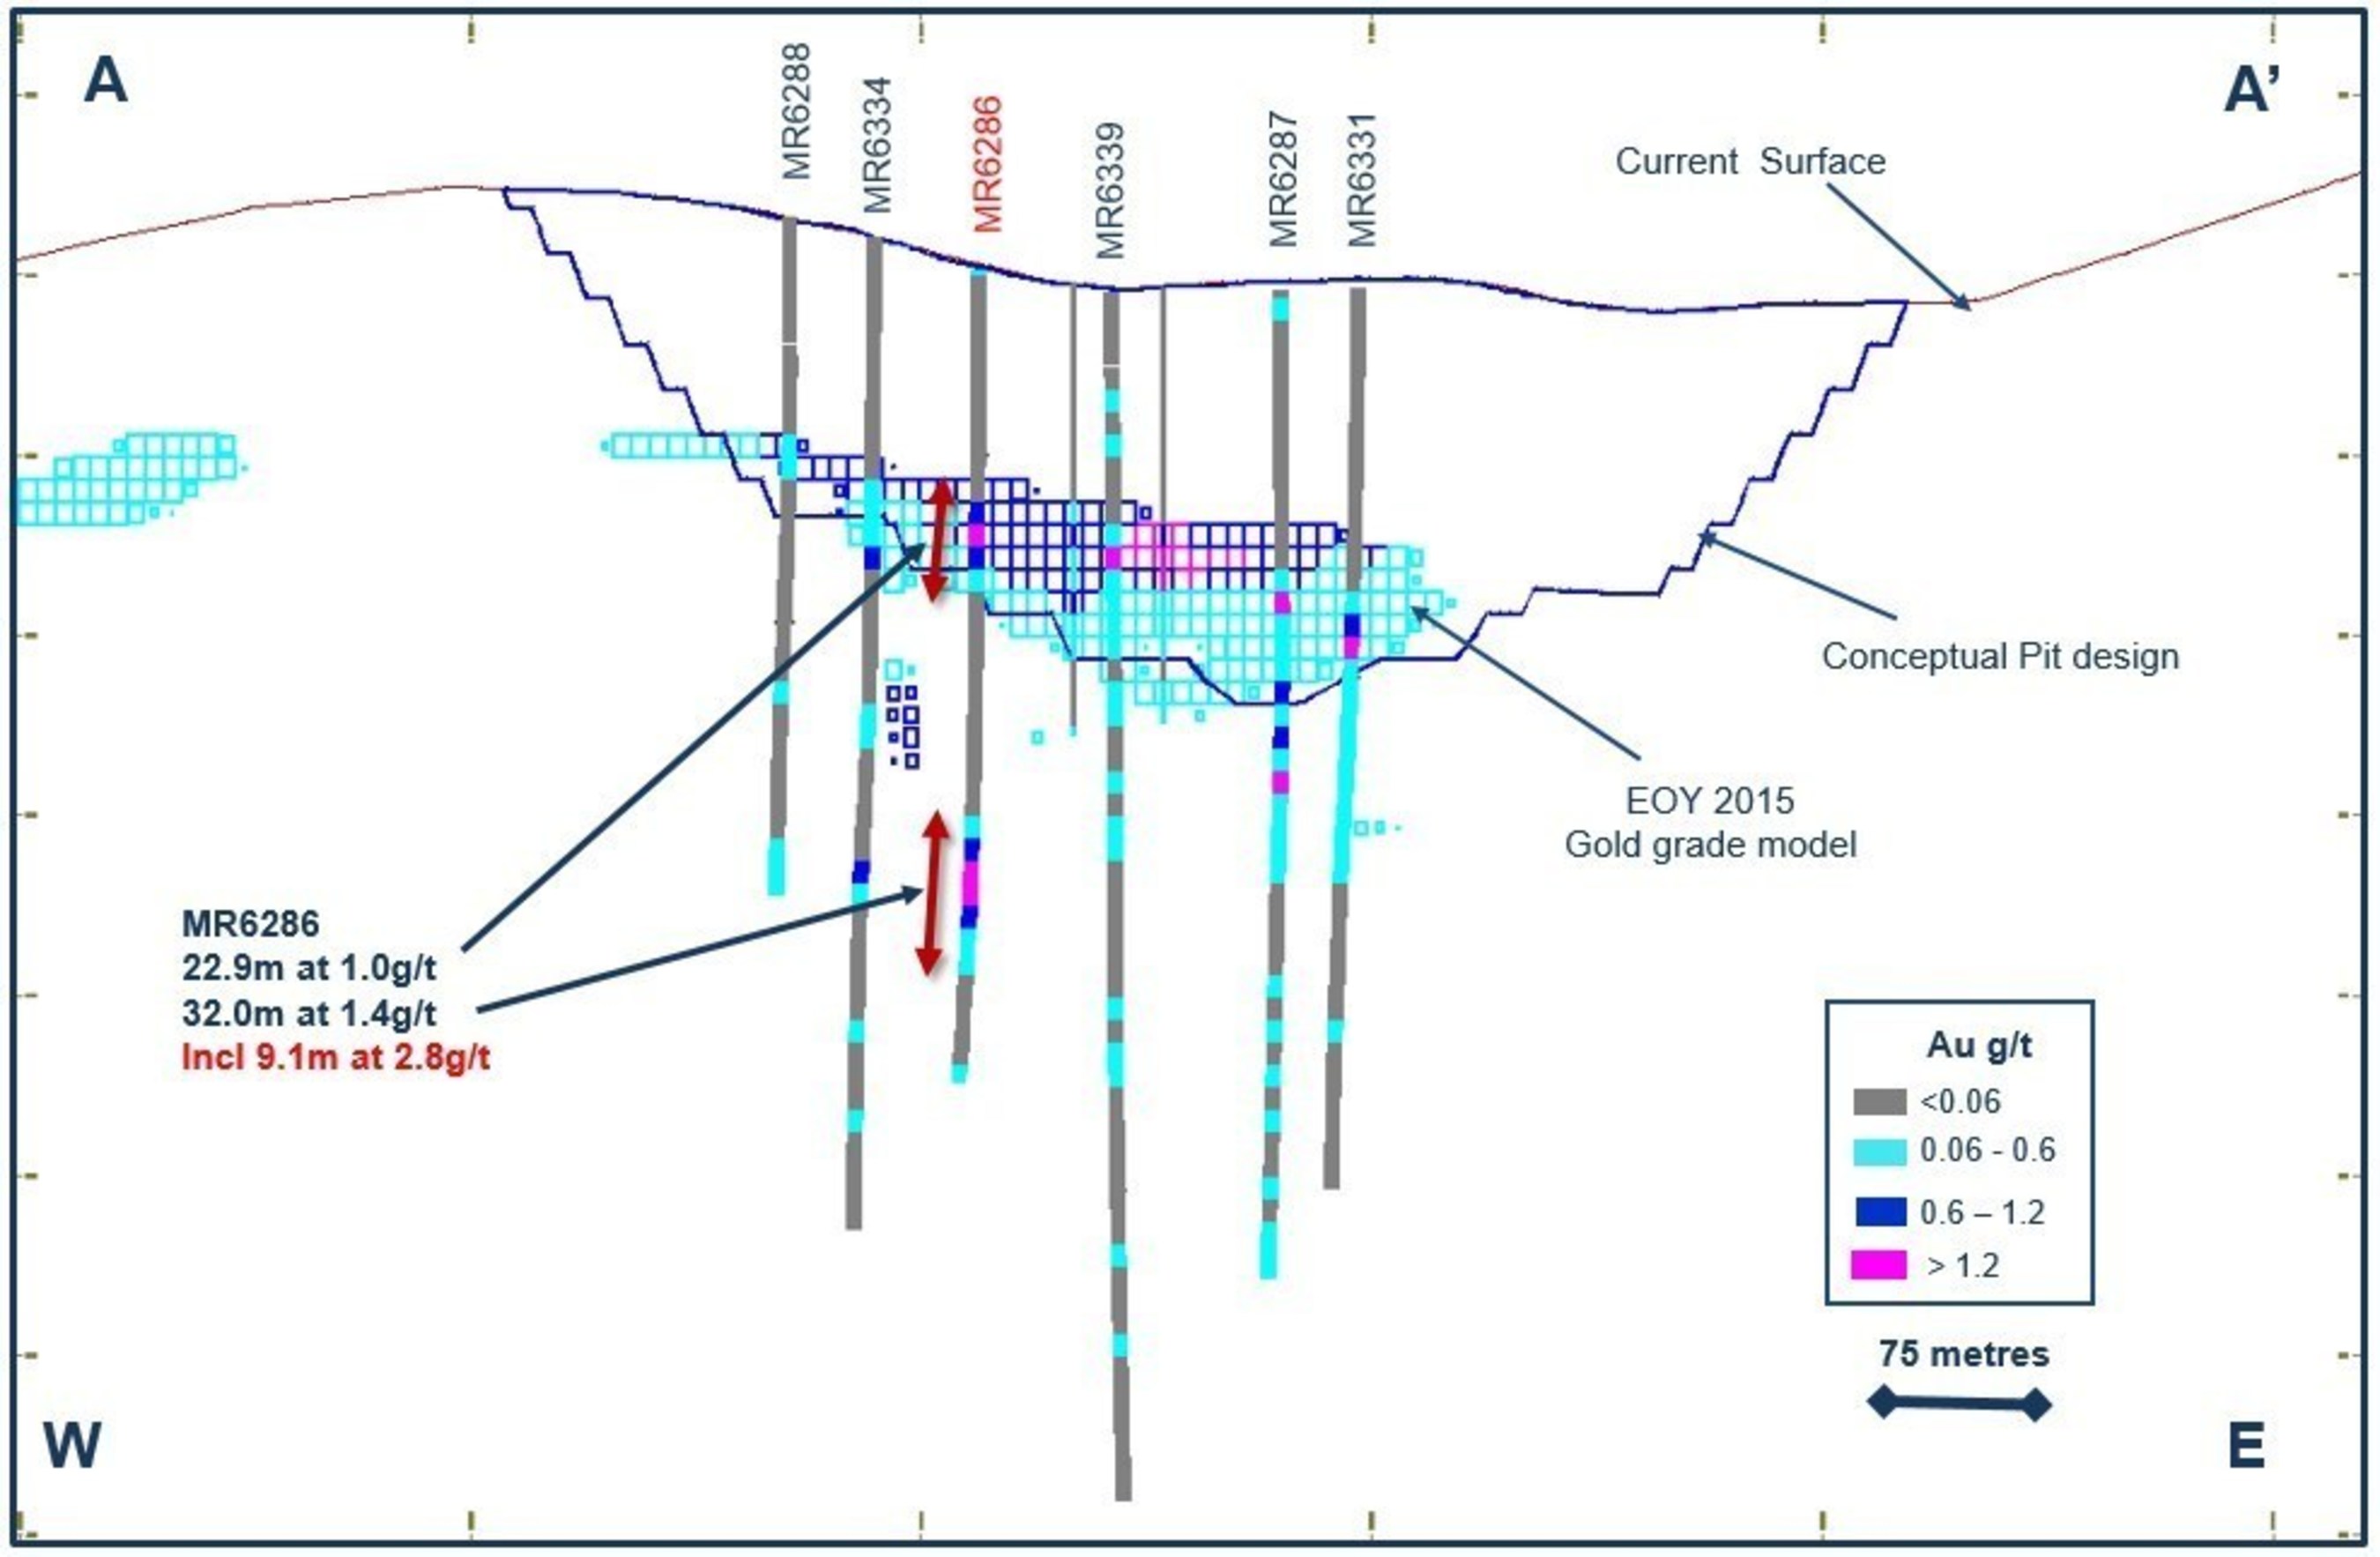 Figure 3. Drill cross section along A-A' highlighting the second favorable mineralized horizon, South of the existing Valmy pit at the Marigold mine, Nevada, U.S.